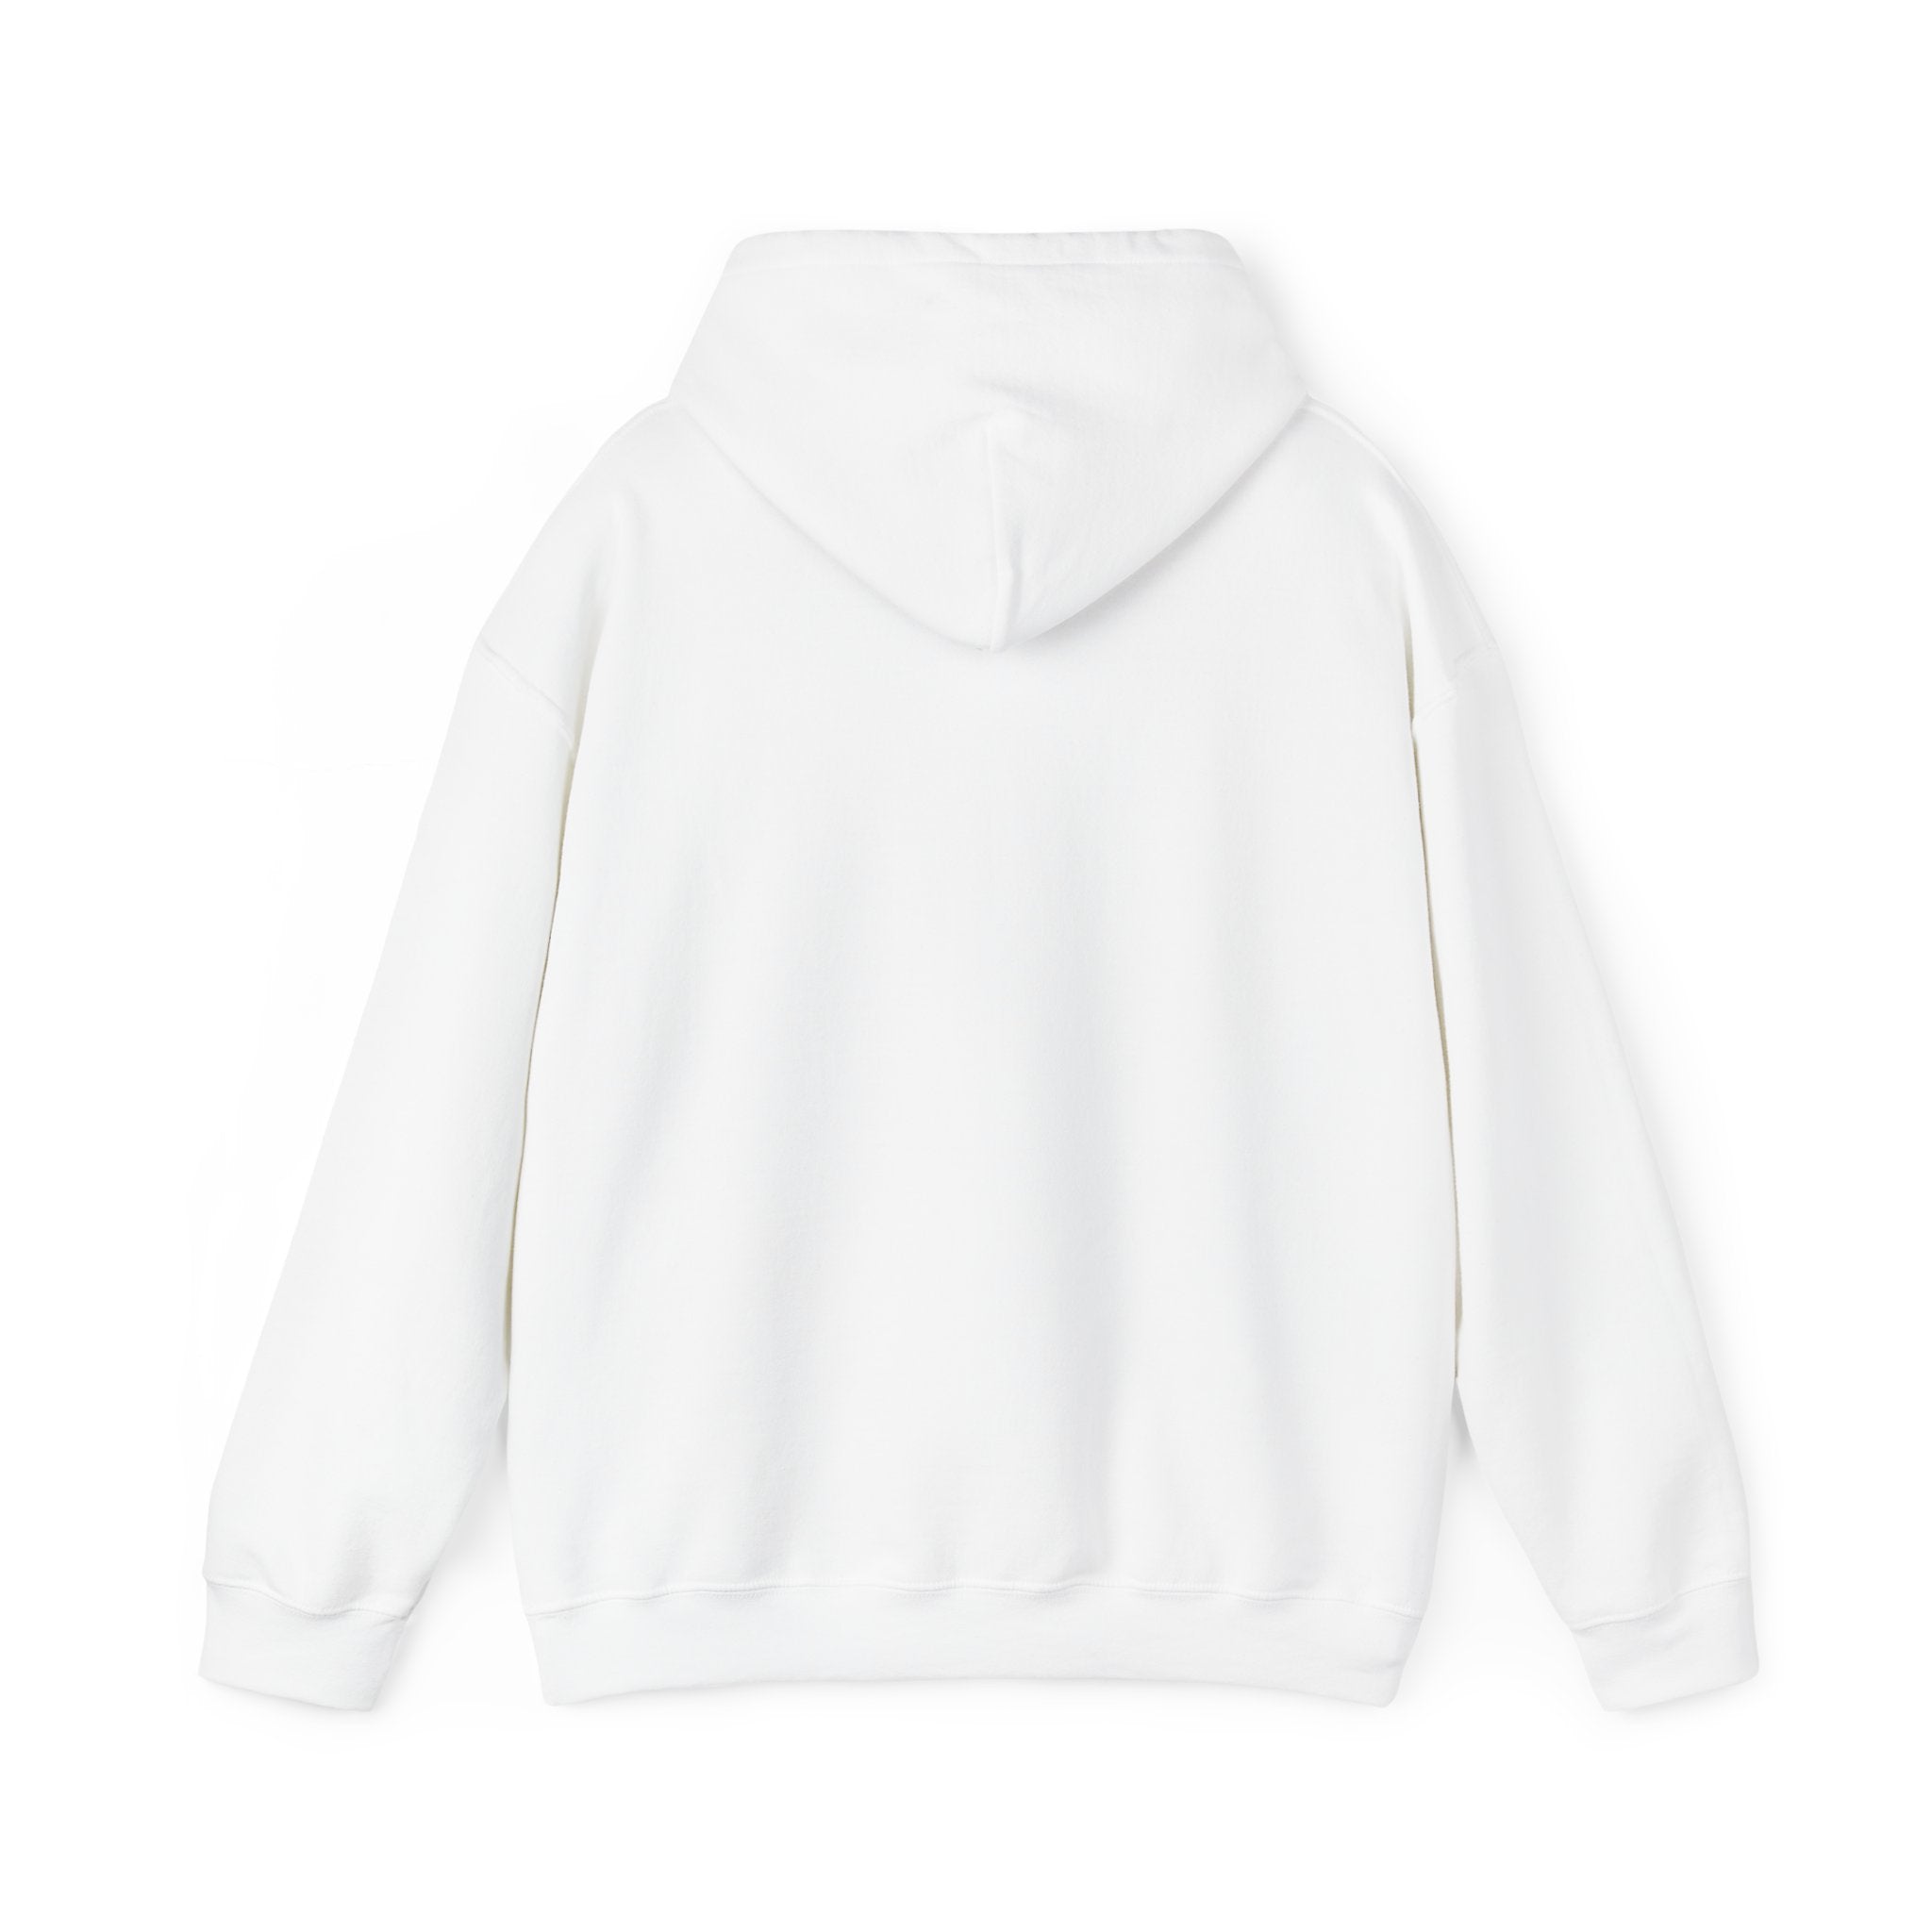 A plain white LA-TI-NA - Hooded Sweatshirt viewed from the back, featuring its hood and long sleeves. Made from 100% cotton, this comfortable design adds a touch of simplicity to your wardrobe.